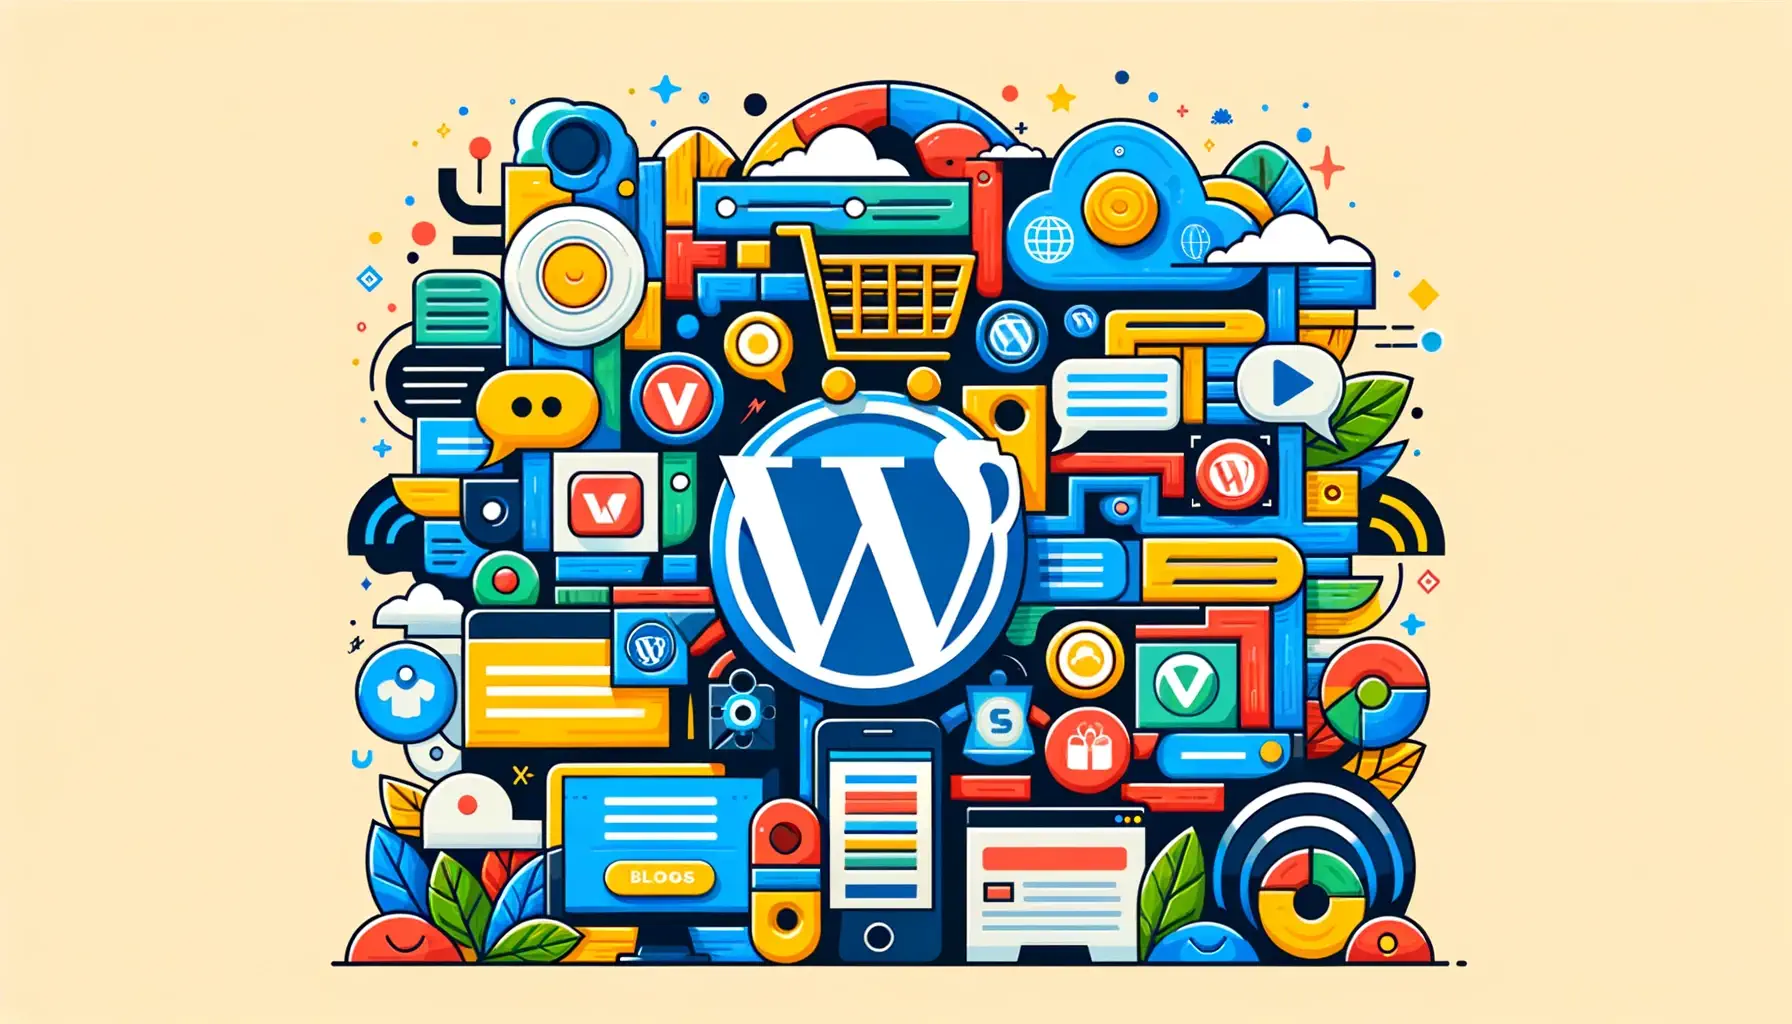 Colorful illustration featuring WordPress and e-commerce symbols such as shopping carts and plugin icons, representing a variety of free WordPress ecommerce plugins